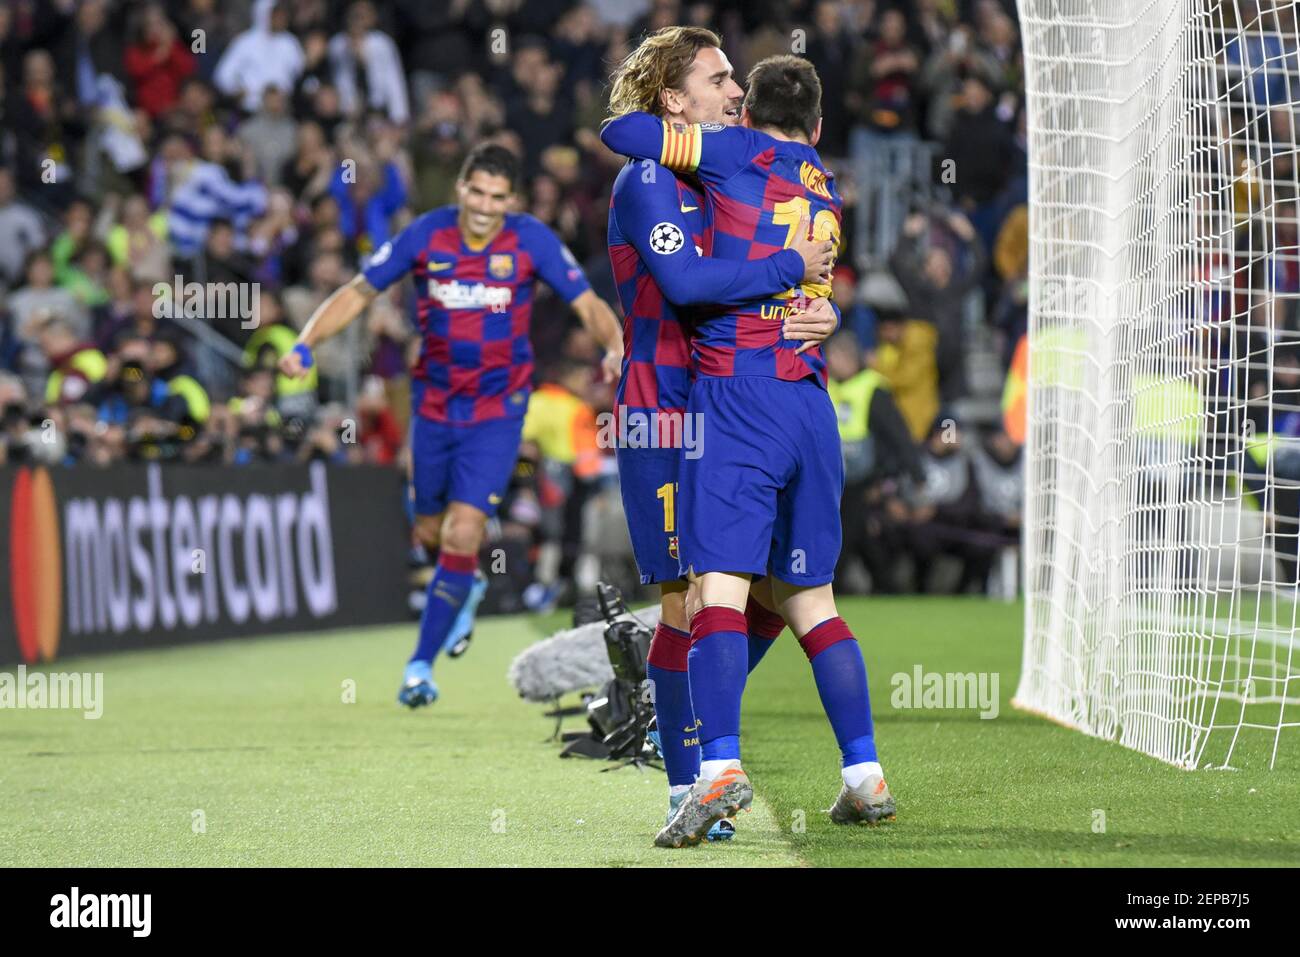 Lionel Messi of Barcelona celebrates his goal with Antoine Griezmann of Barcelona during the UEFA Champions League Group F match between FC Barcelona and Borussia Dortmund at Camp Nou Stadium in Barcelona, Spain on November 27, 2019 (Photo by Andrew Surma / SIPA USA) Stock Photo